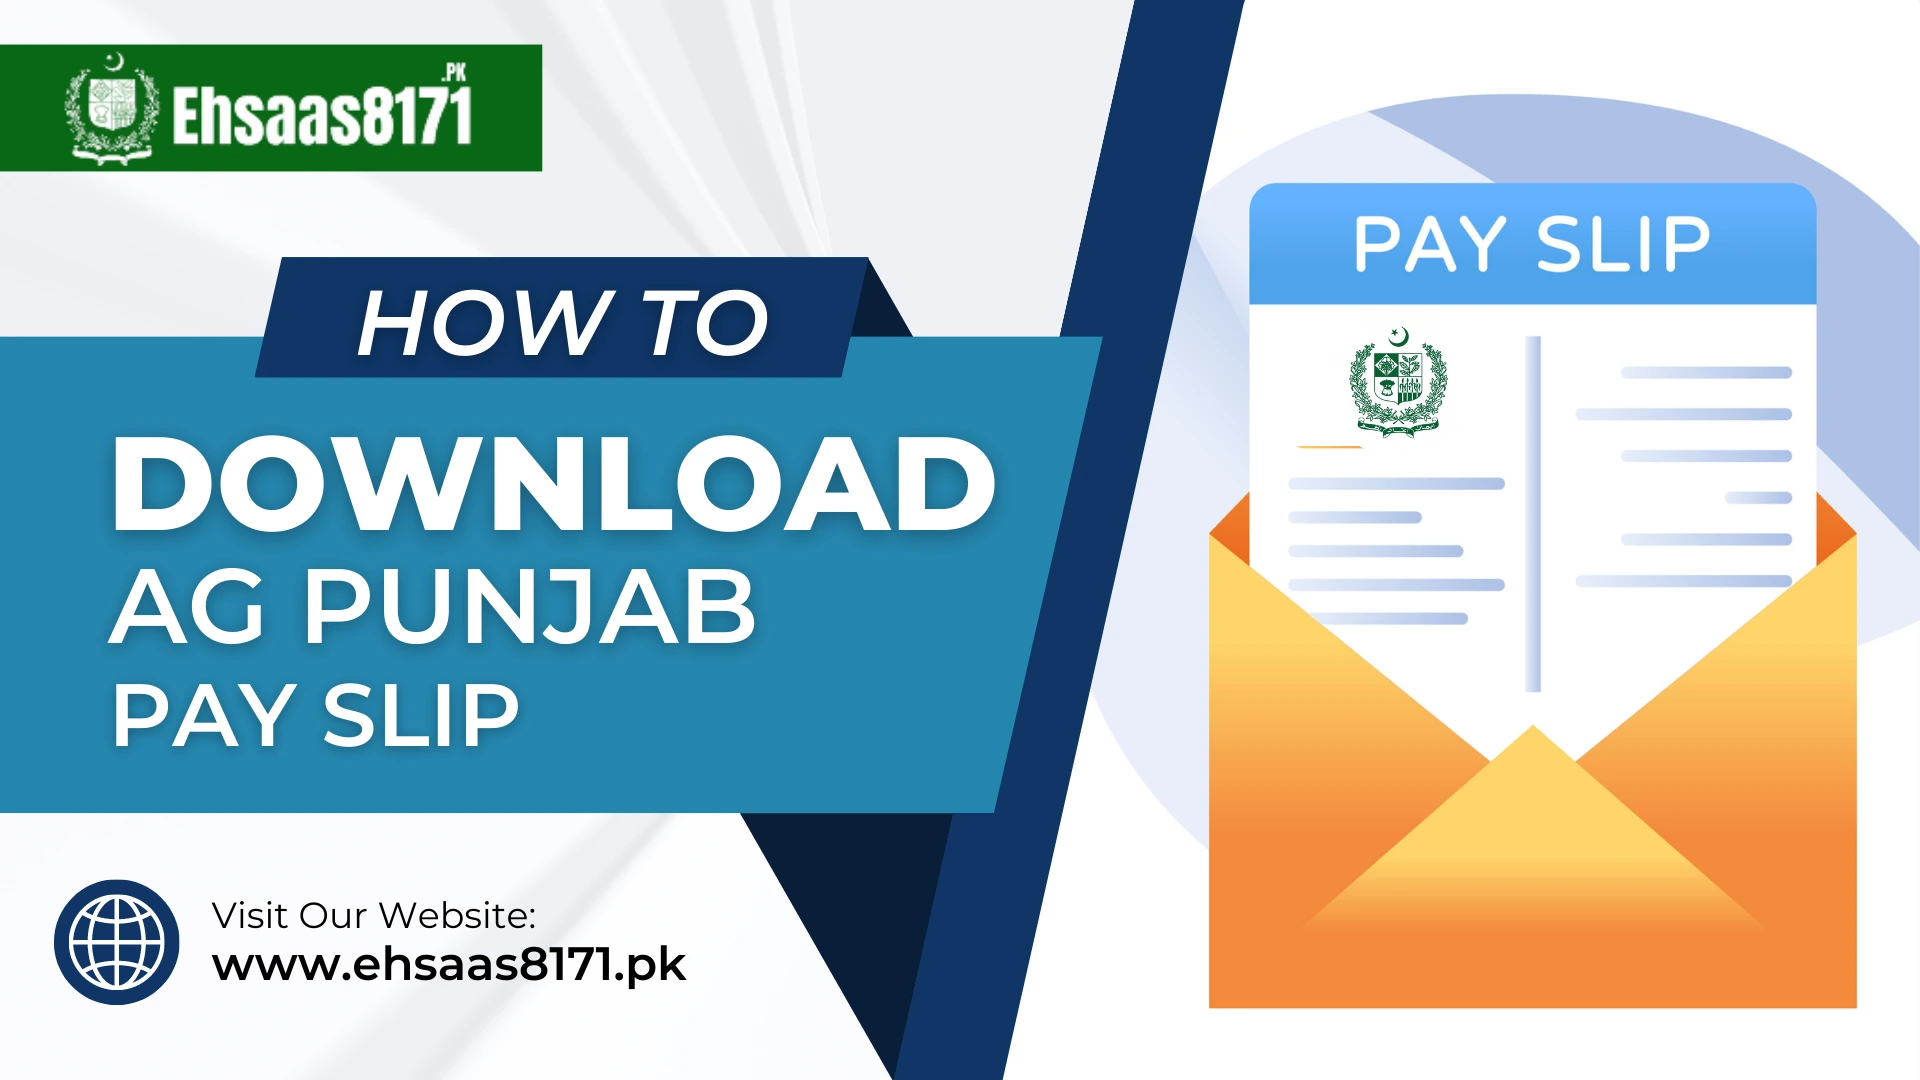 How To Download AG Punjab Pay Slip